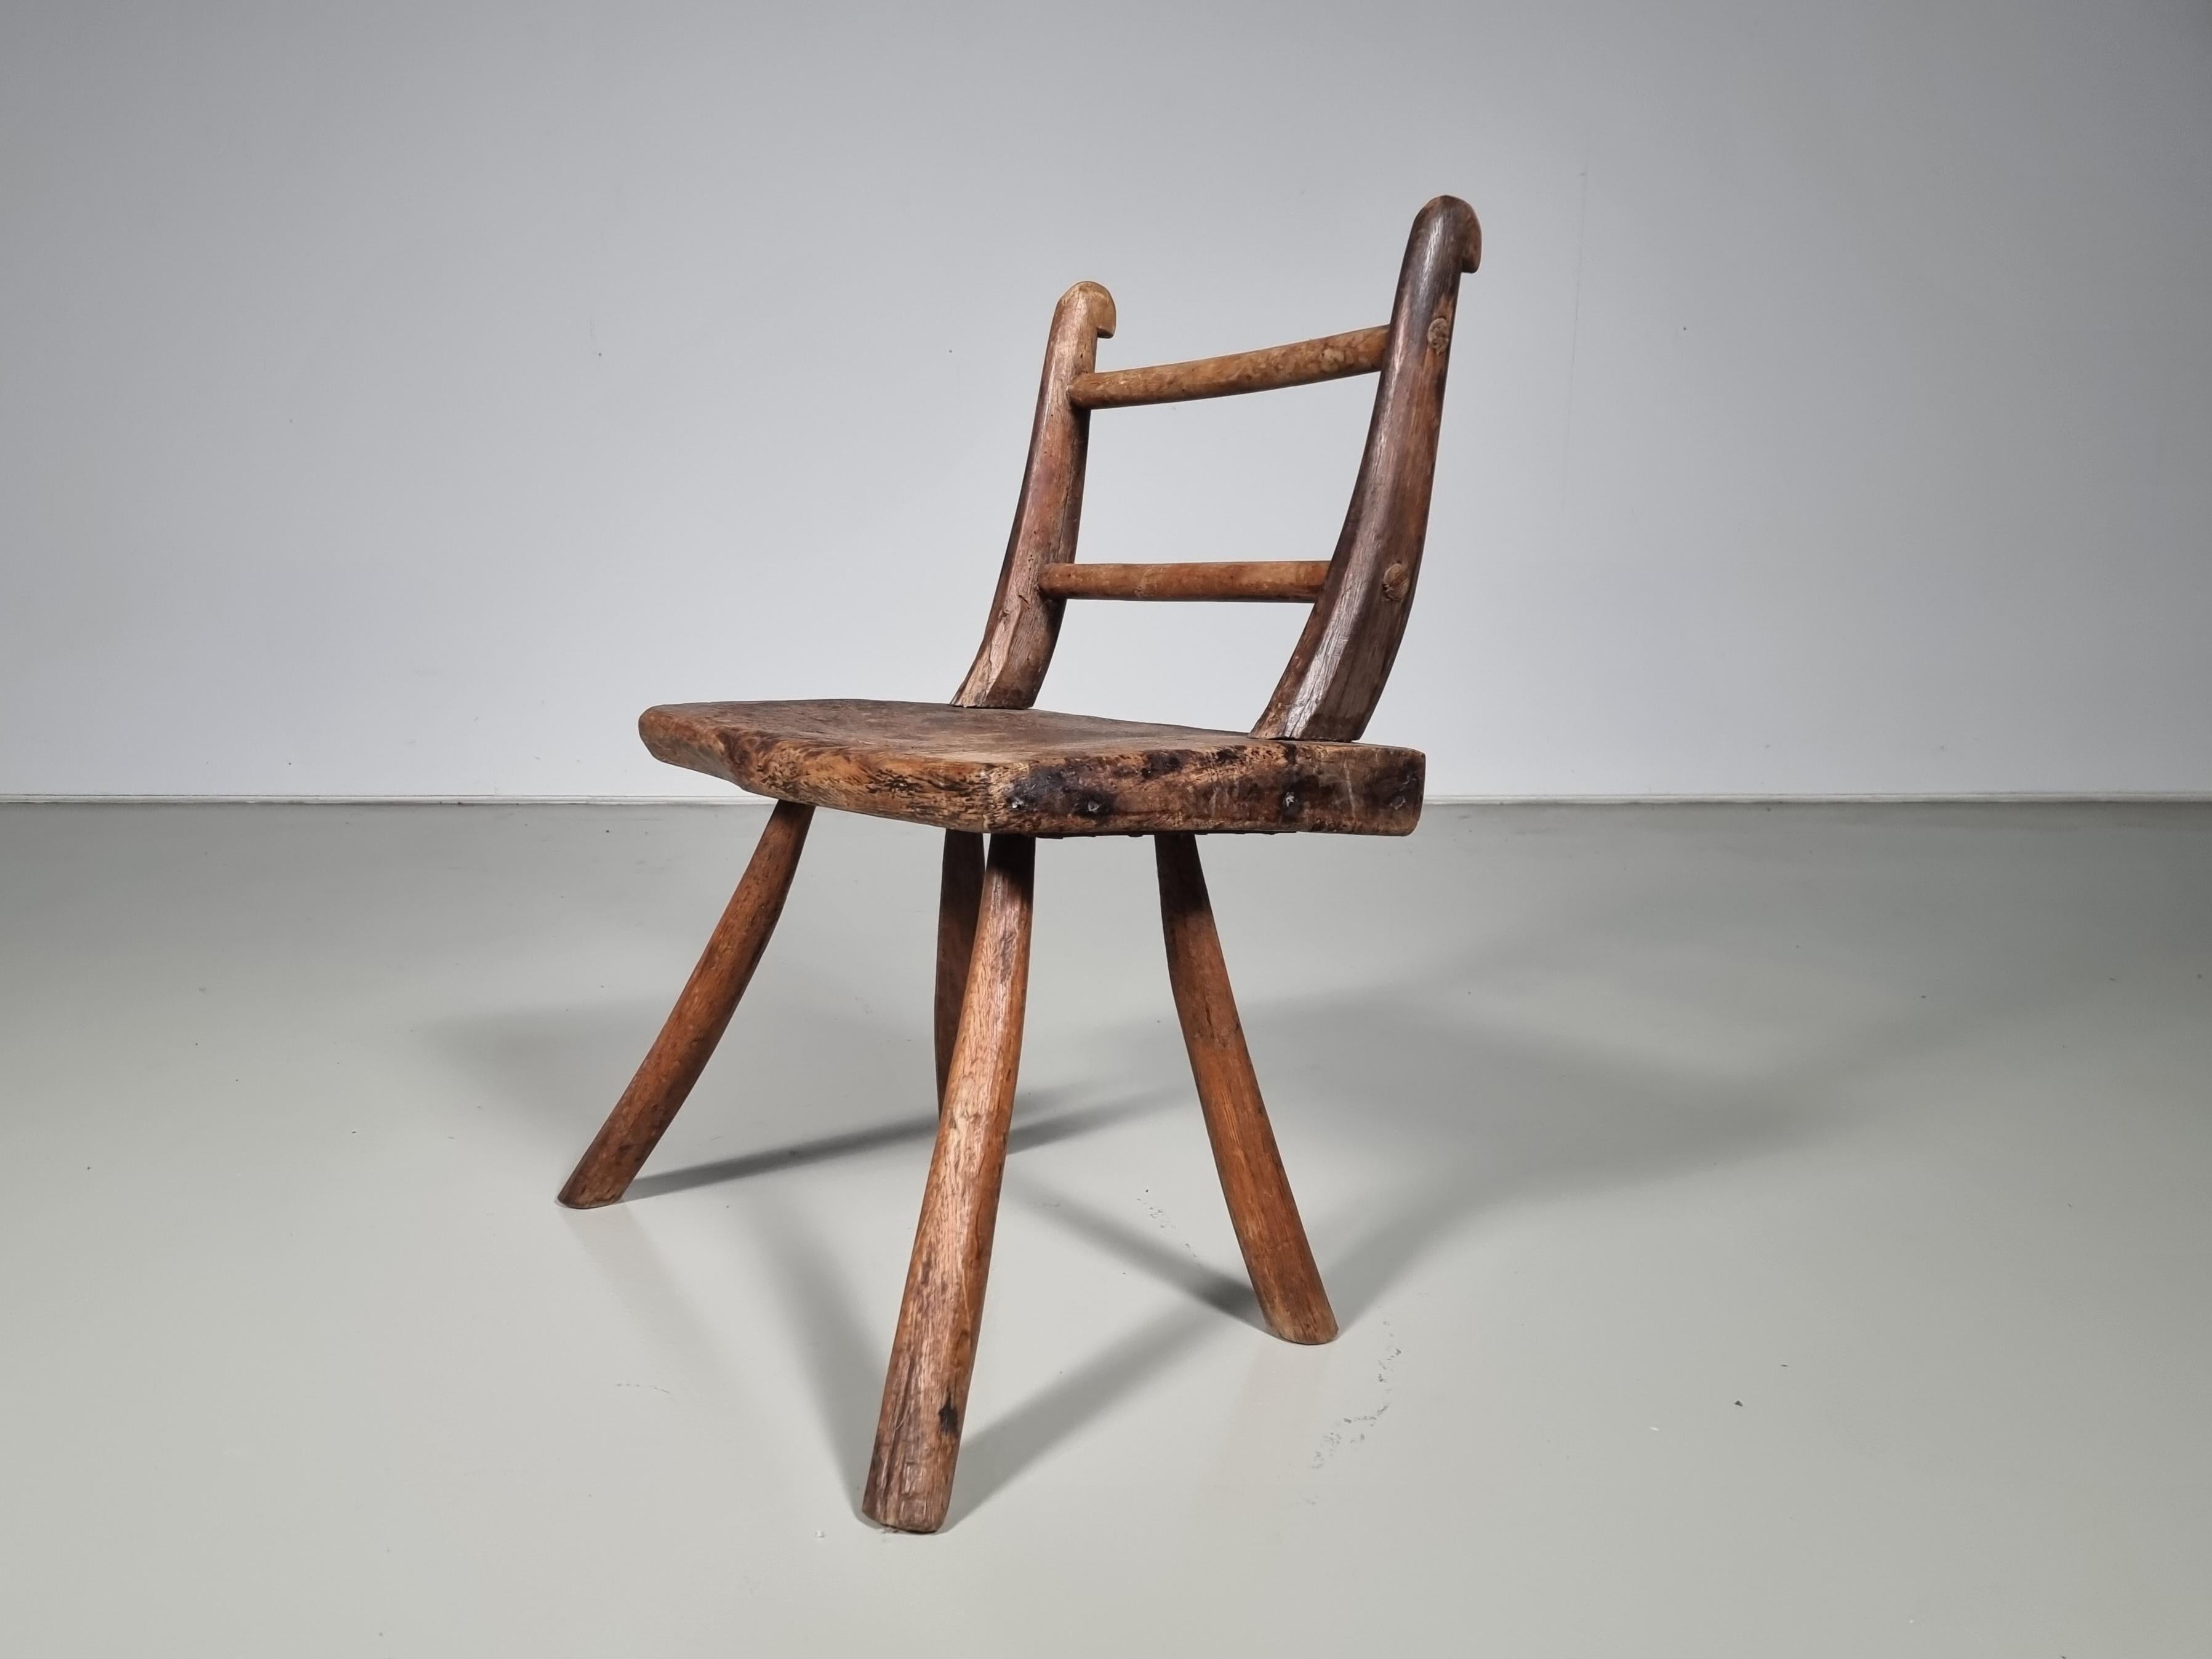 European Rustic Wabi-Sabi Style Side Chair Constructed of Curved Dark Hardwood, 1900s For Sale